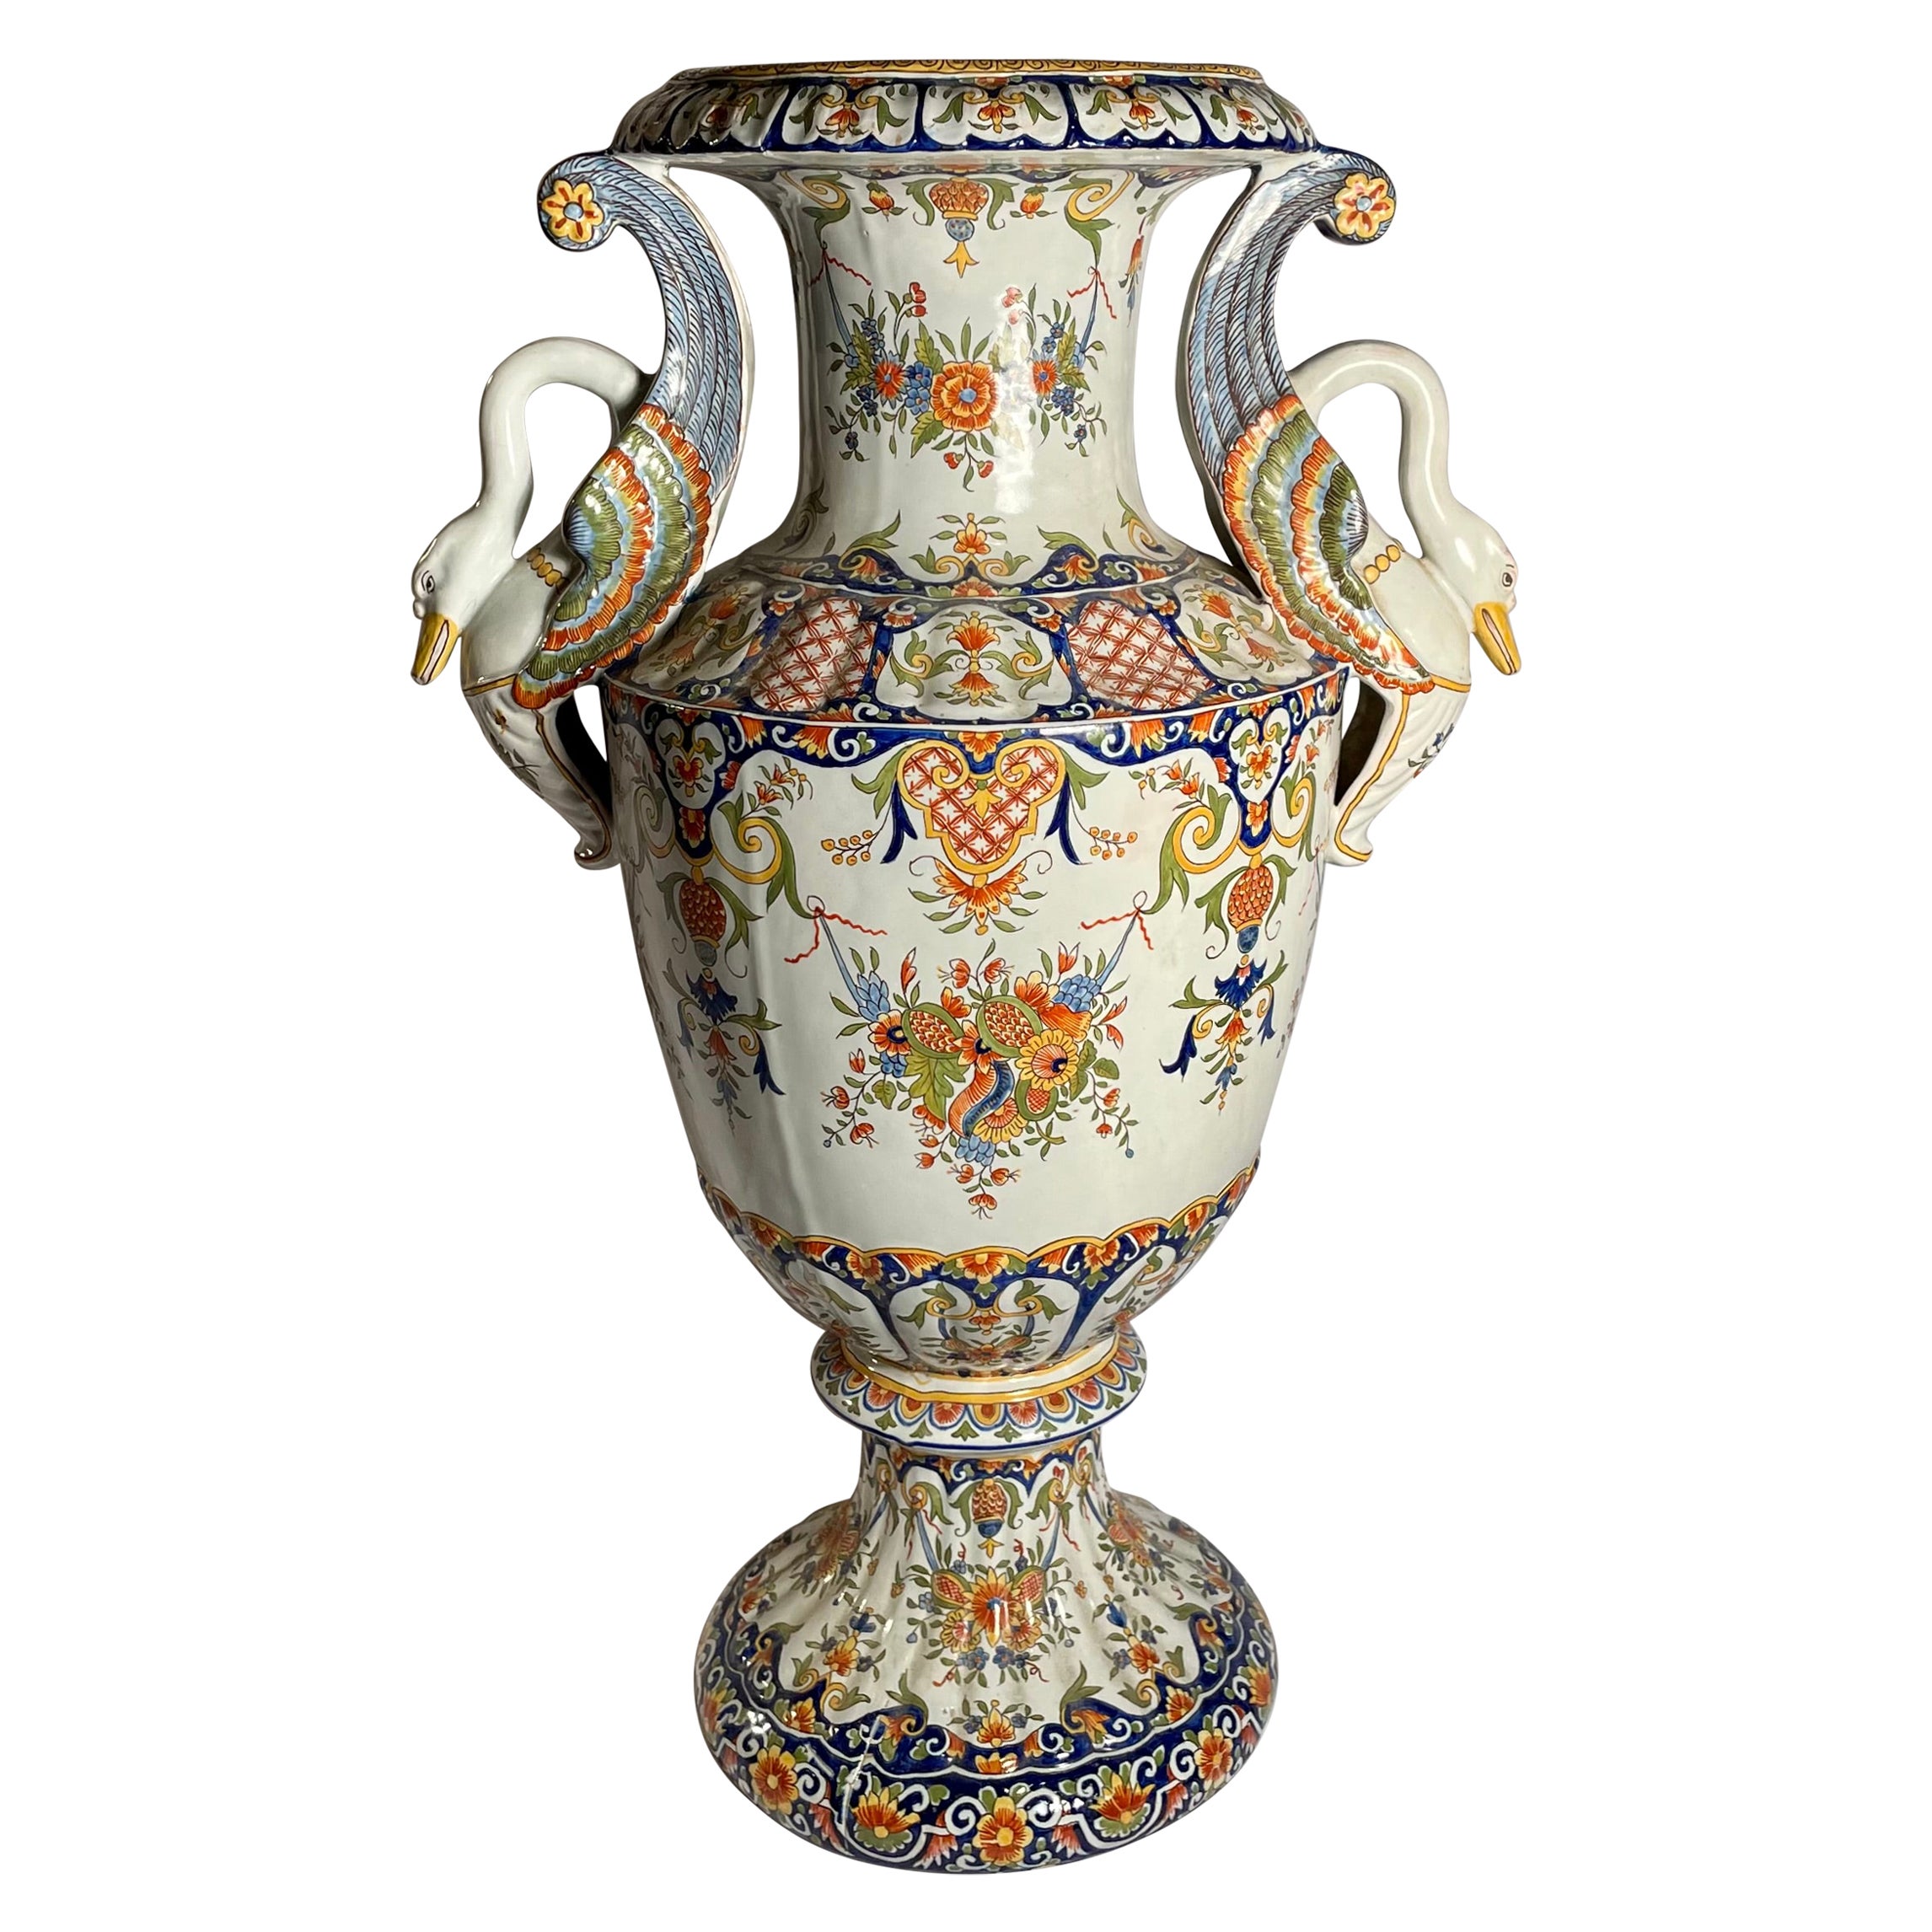 Antique French Faience Enameled Urn, circa 1900-1910 For Sale